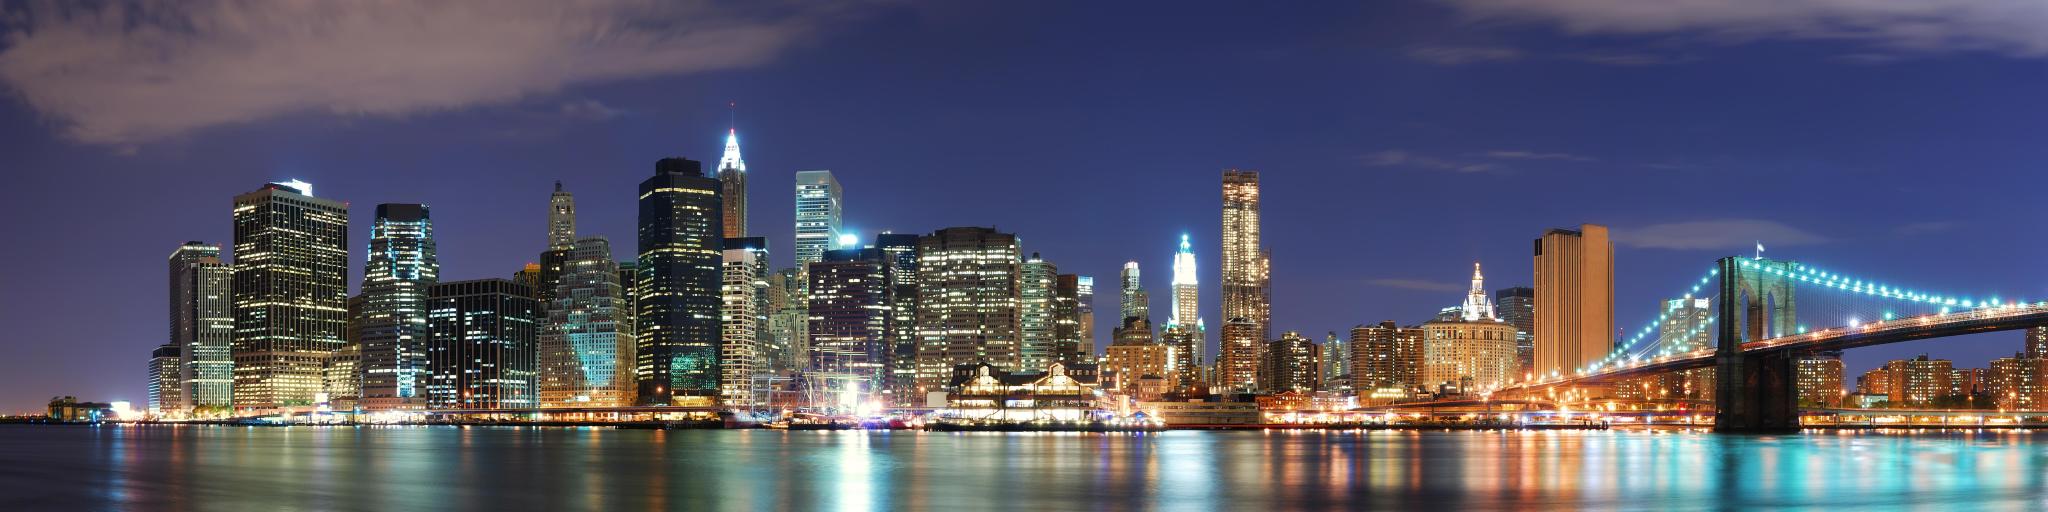 View of high rise buildings and illuminated Brooklyn Bridge at night, from across the river